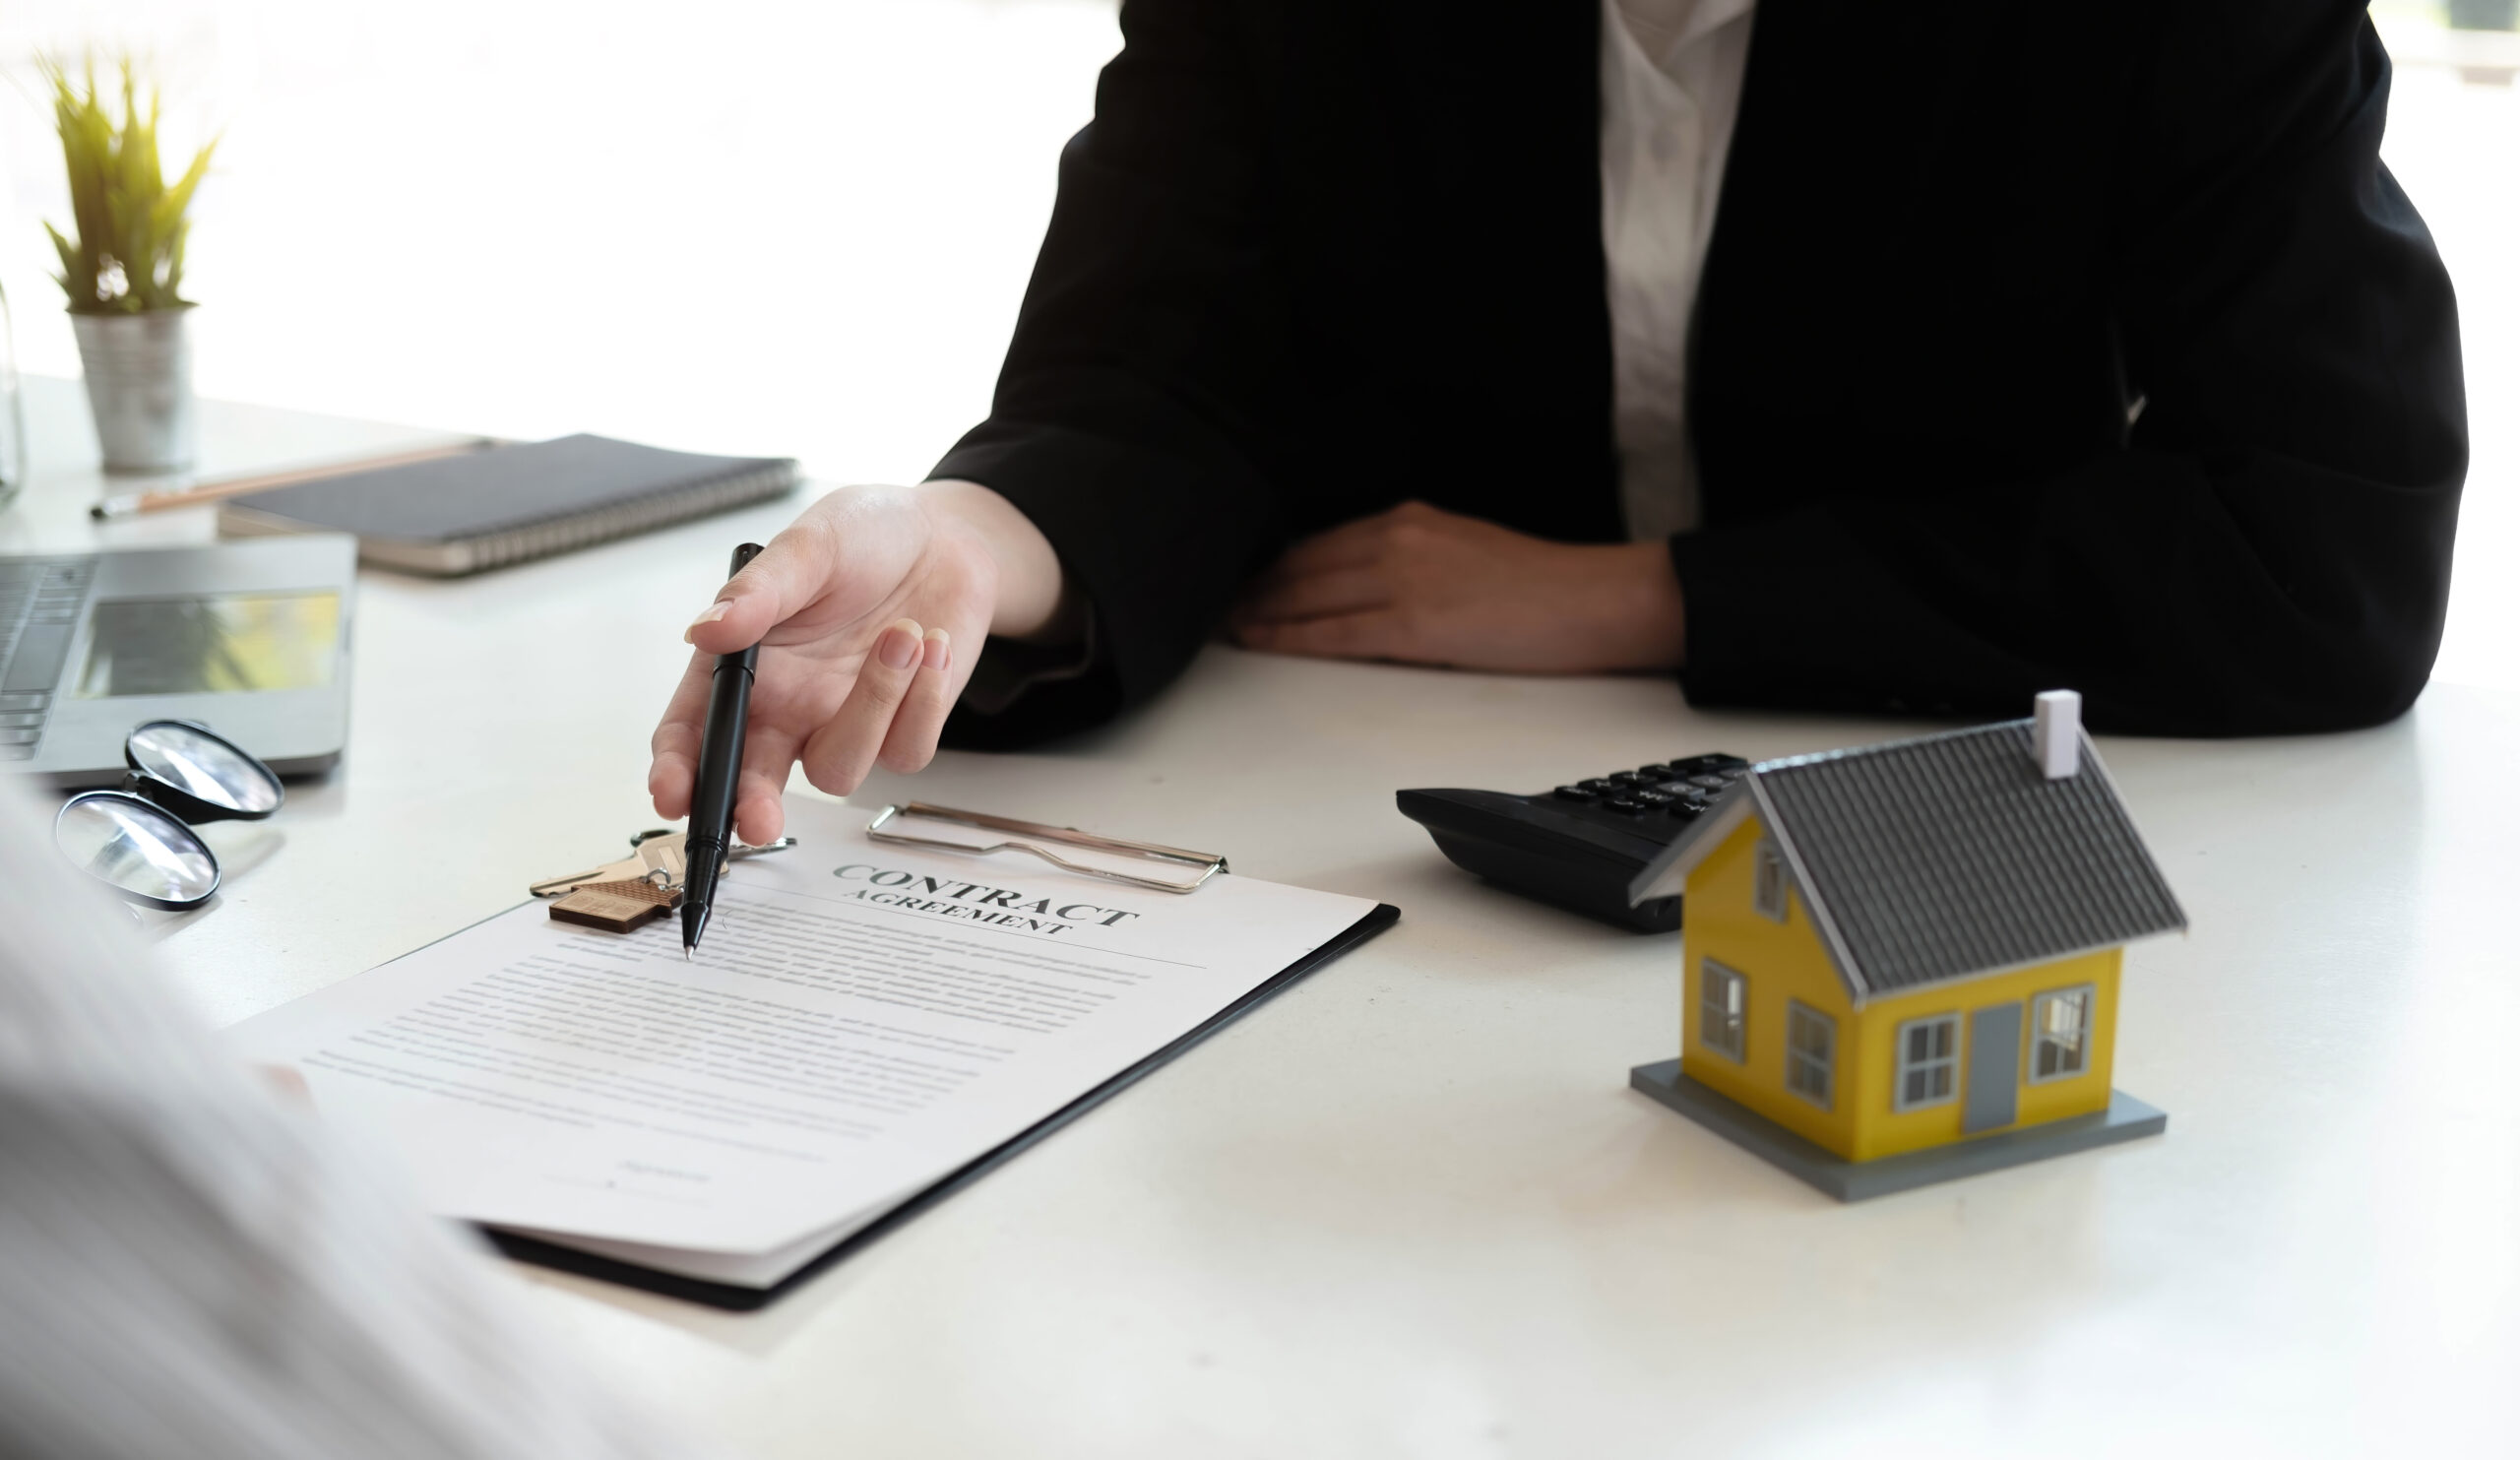 Home agents are explain to customers signing a contract to buy a